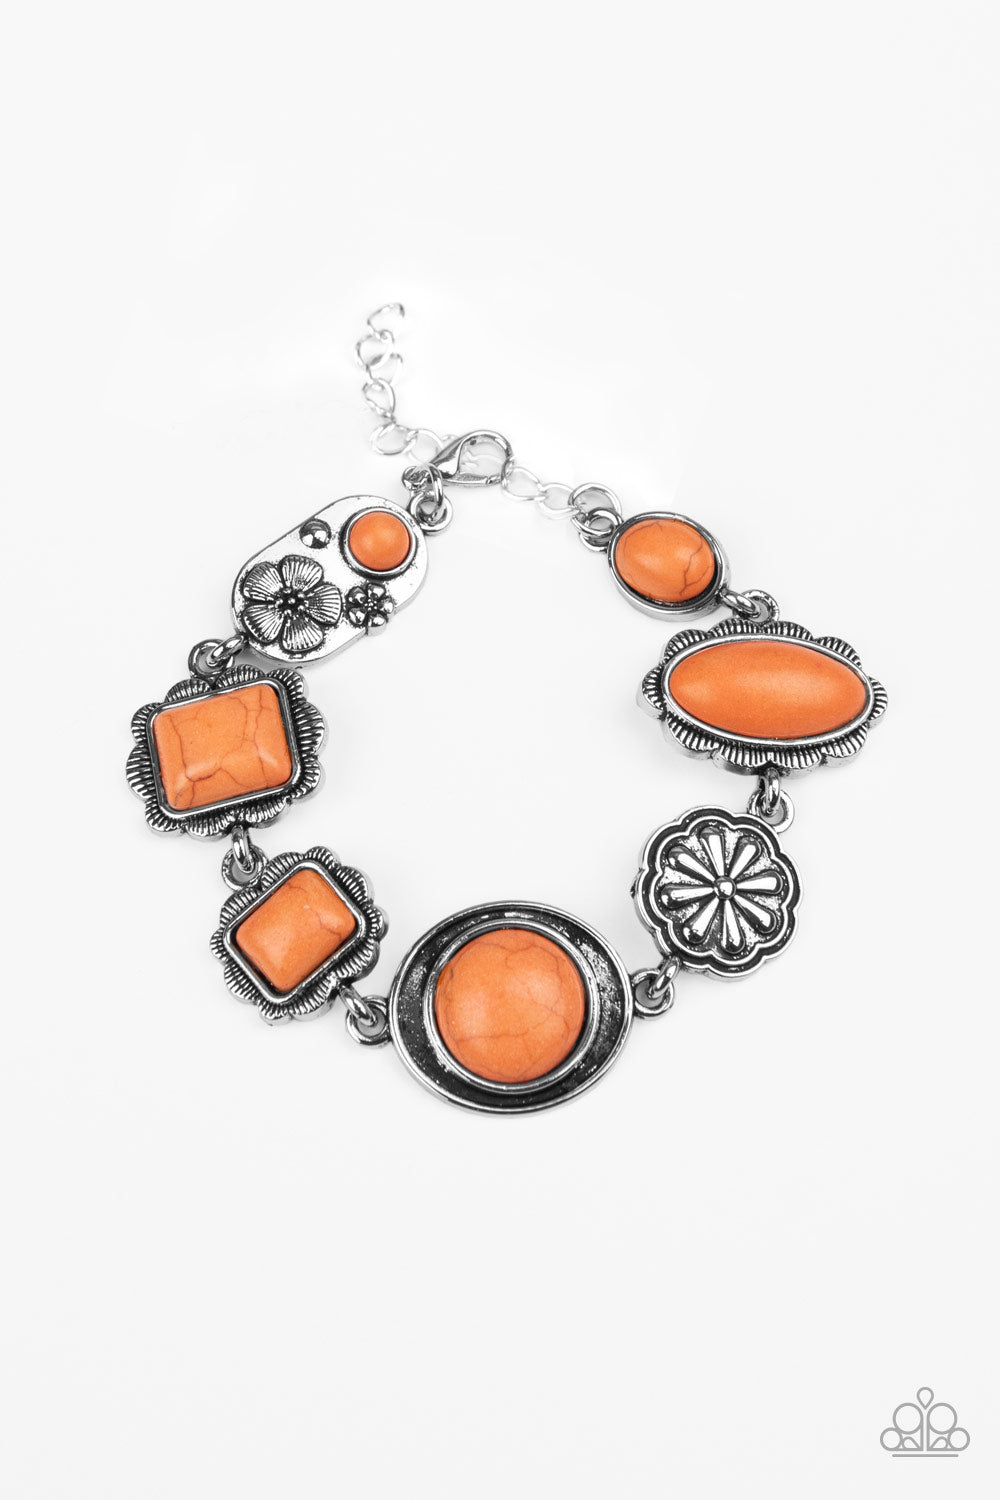 Gorgeously Groundskeeper - Orange and Silver Bracelet - Paparazzi Accessories - Featuring vivacious orange stone centers, a collection of antiqued silver frames link with a decorative floral charm around the wrist for a seasonal flair. Features an adjustable clasp closure. Sold as one individual bracelet.